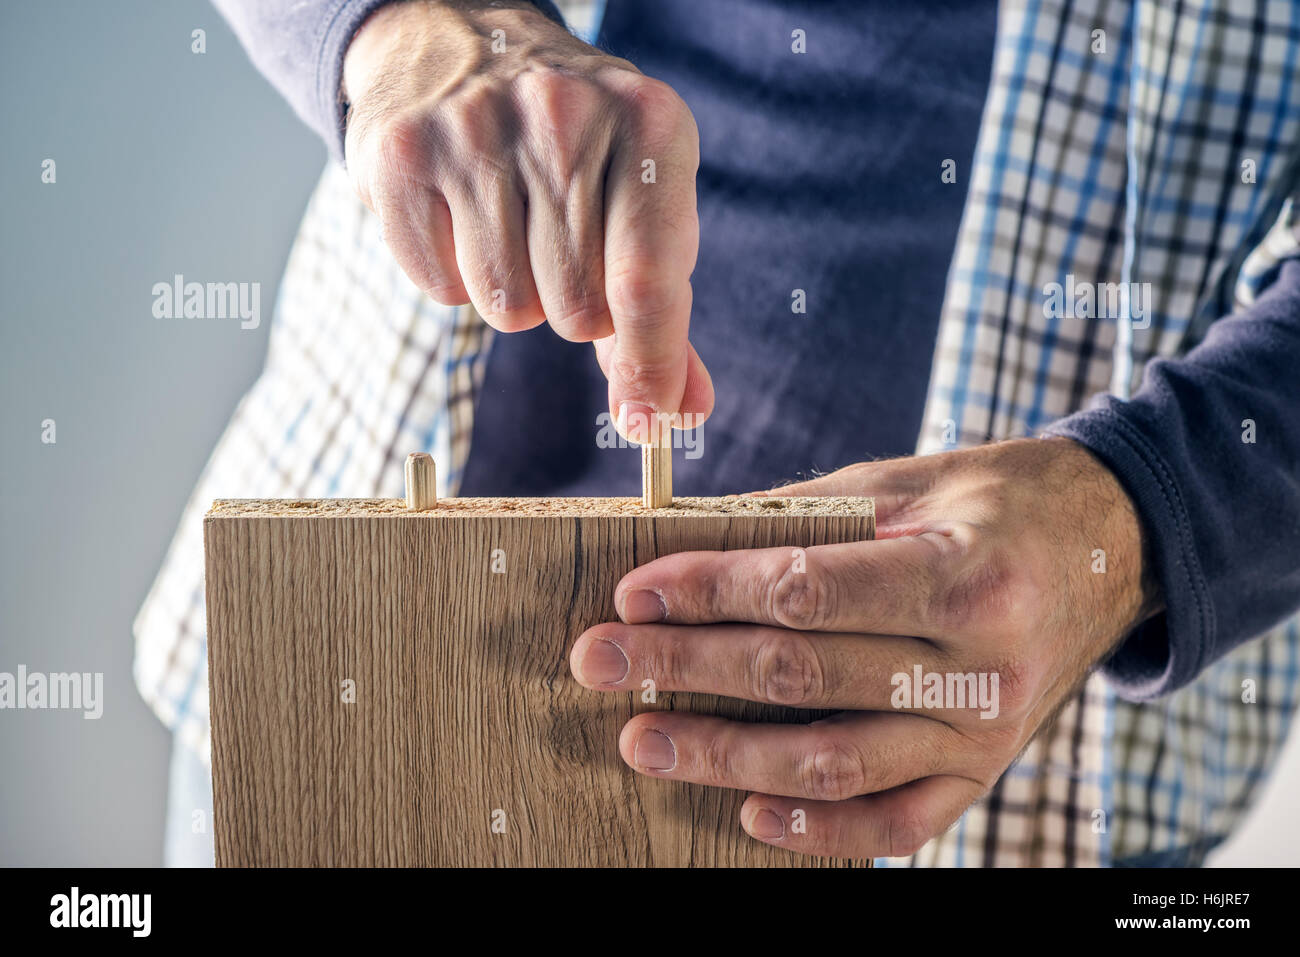 Man assembling furniture at home, male hand with wooden dowel pins and plywood board Stock Photo